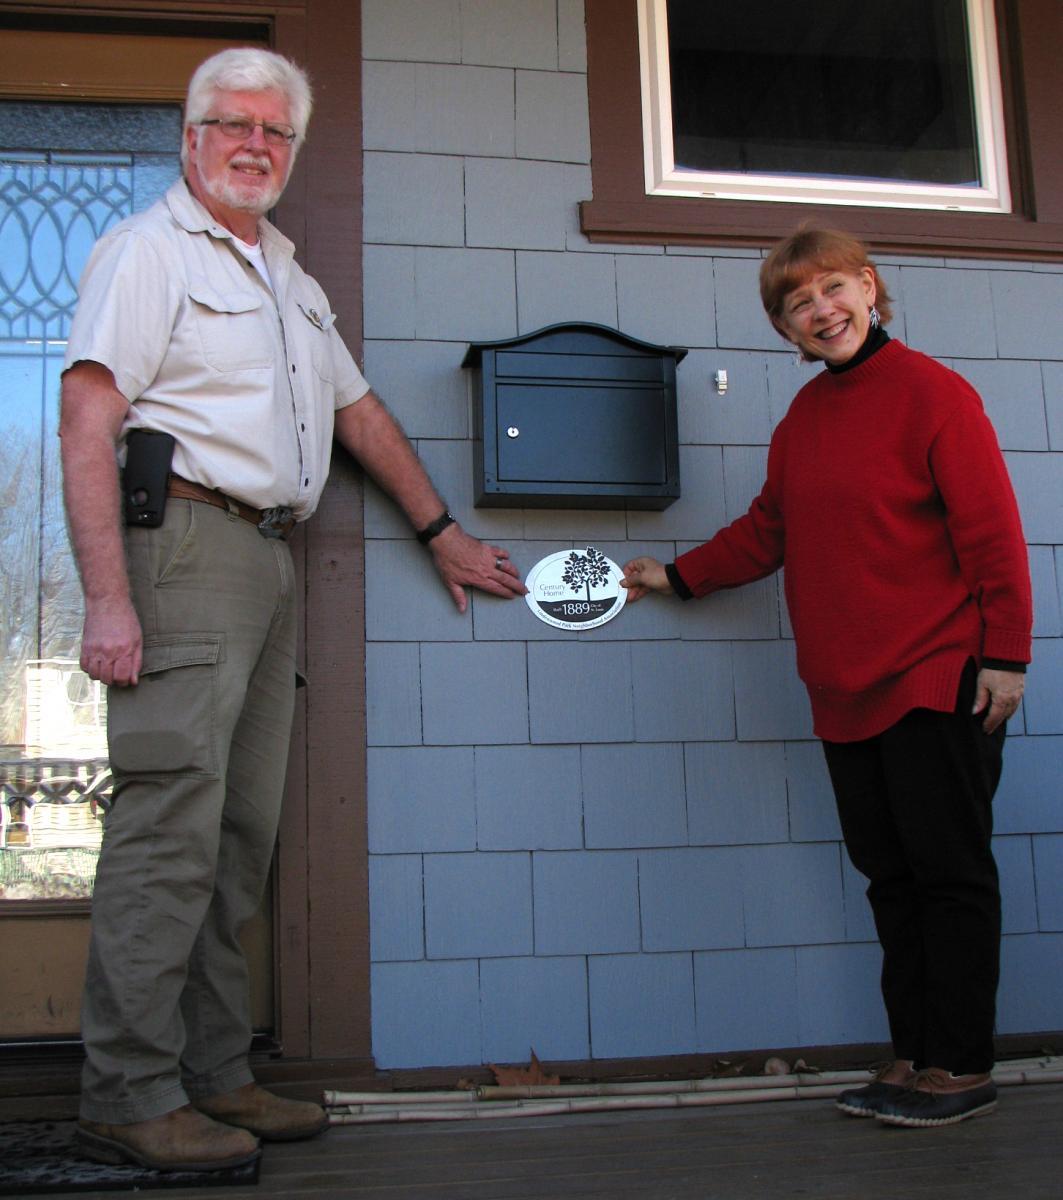 Ed and Mary with their newly minted century home plaque.